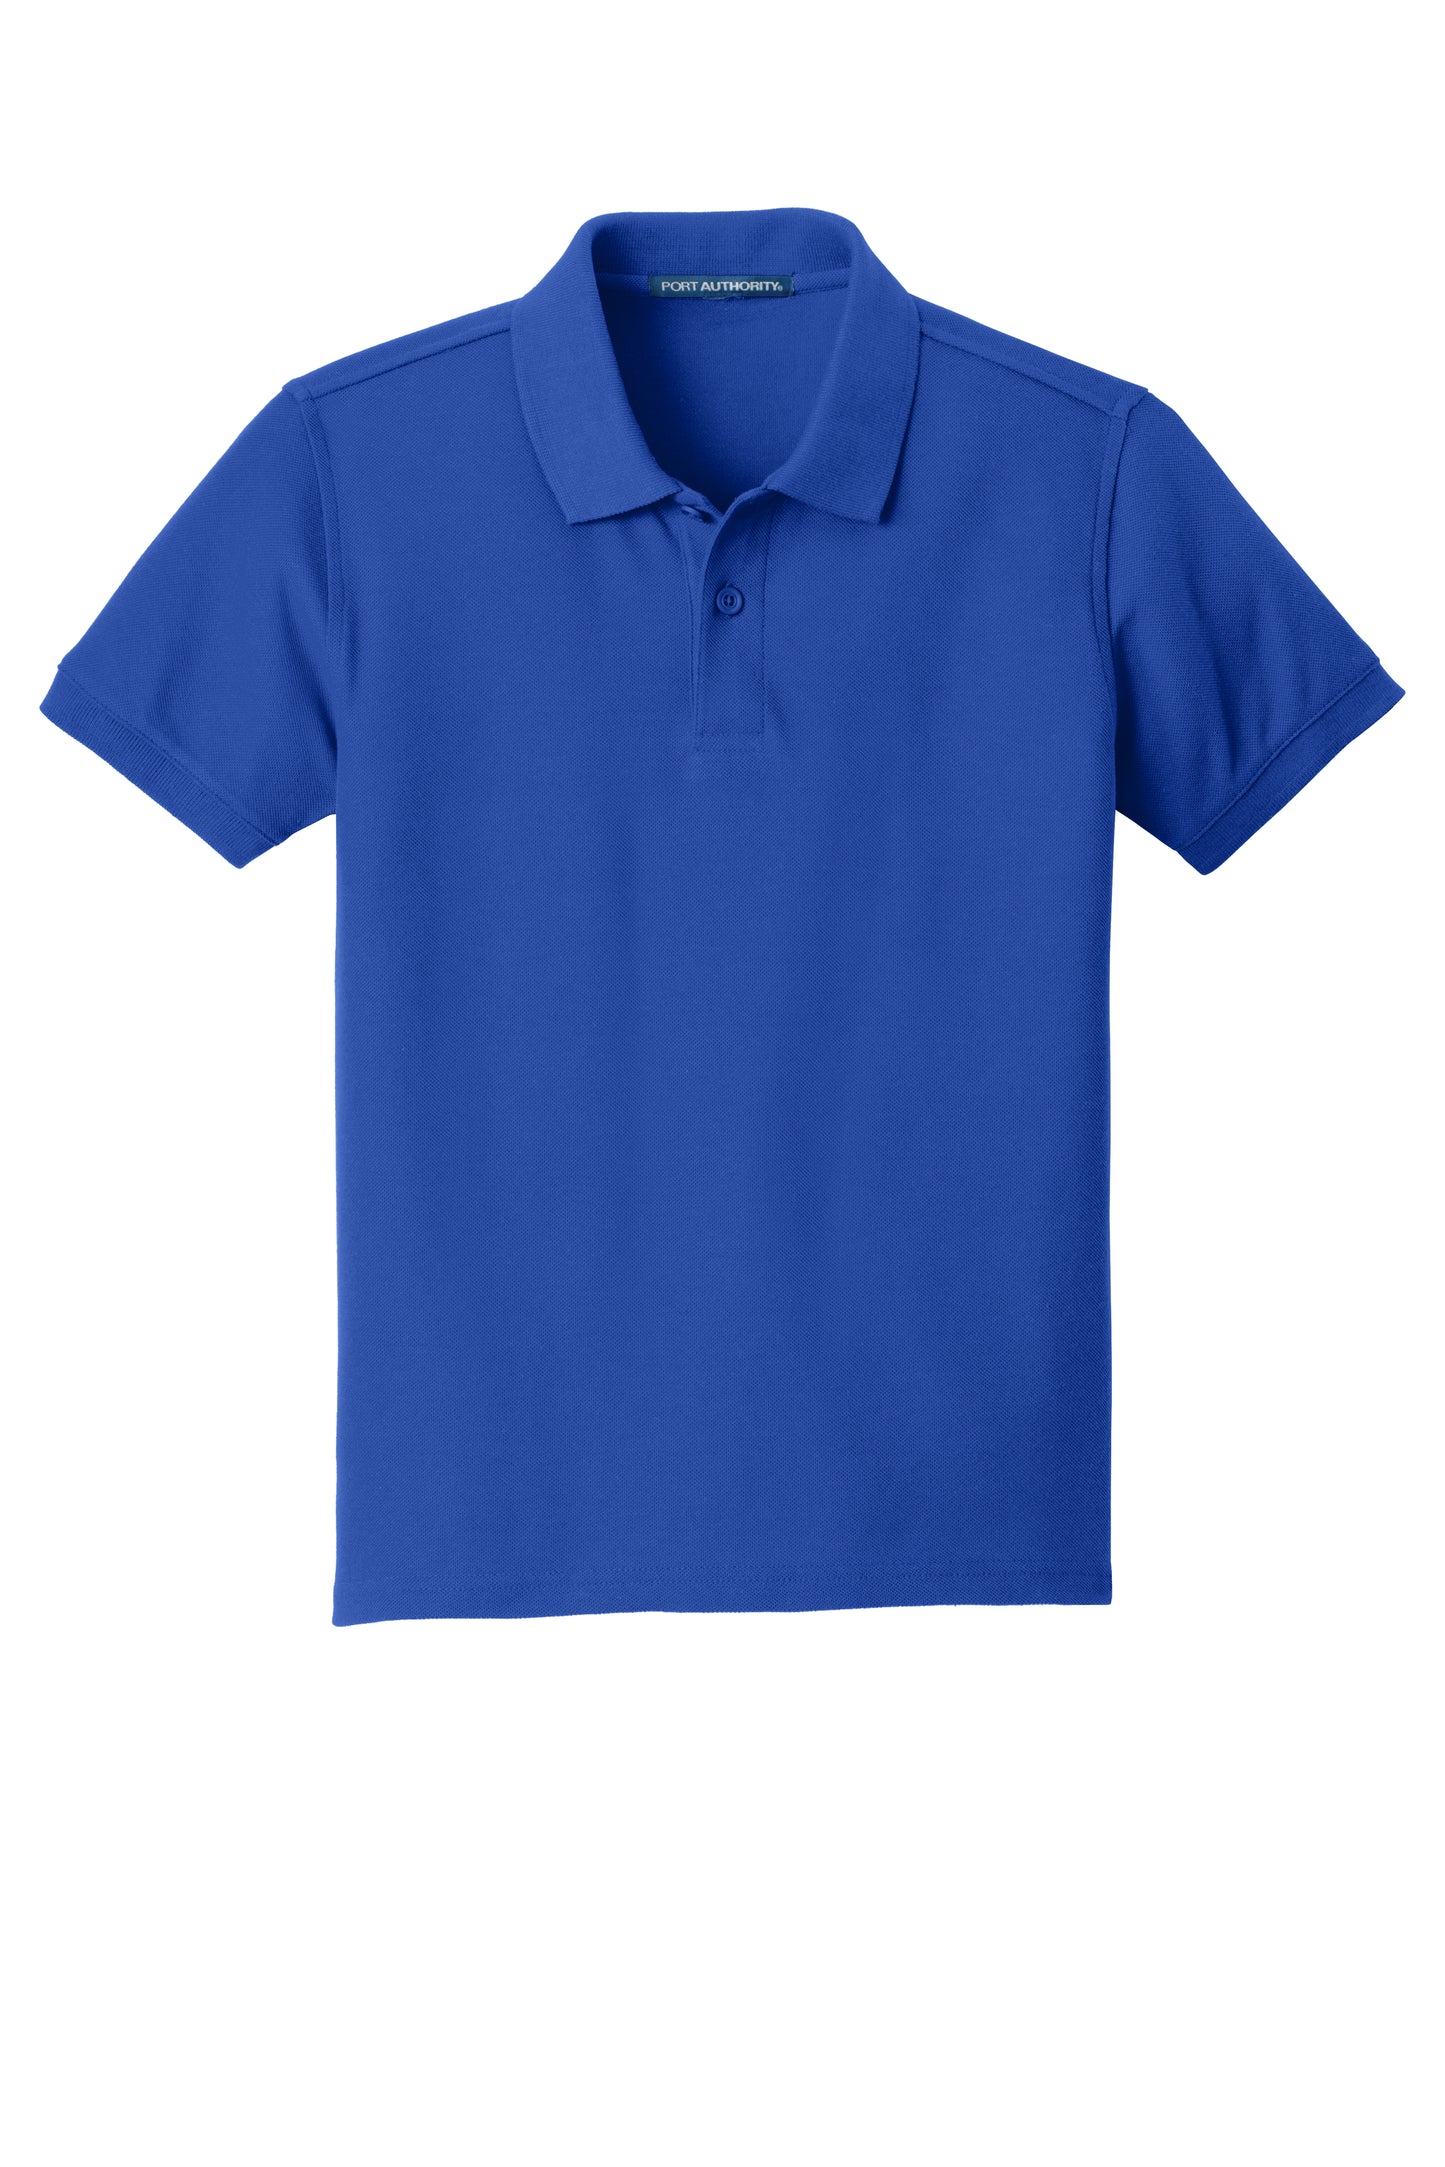 port authority youth core classic pique polo true royal blue